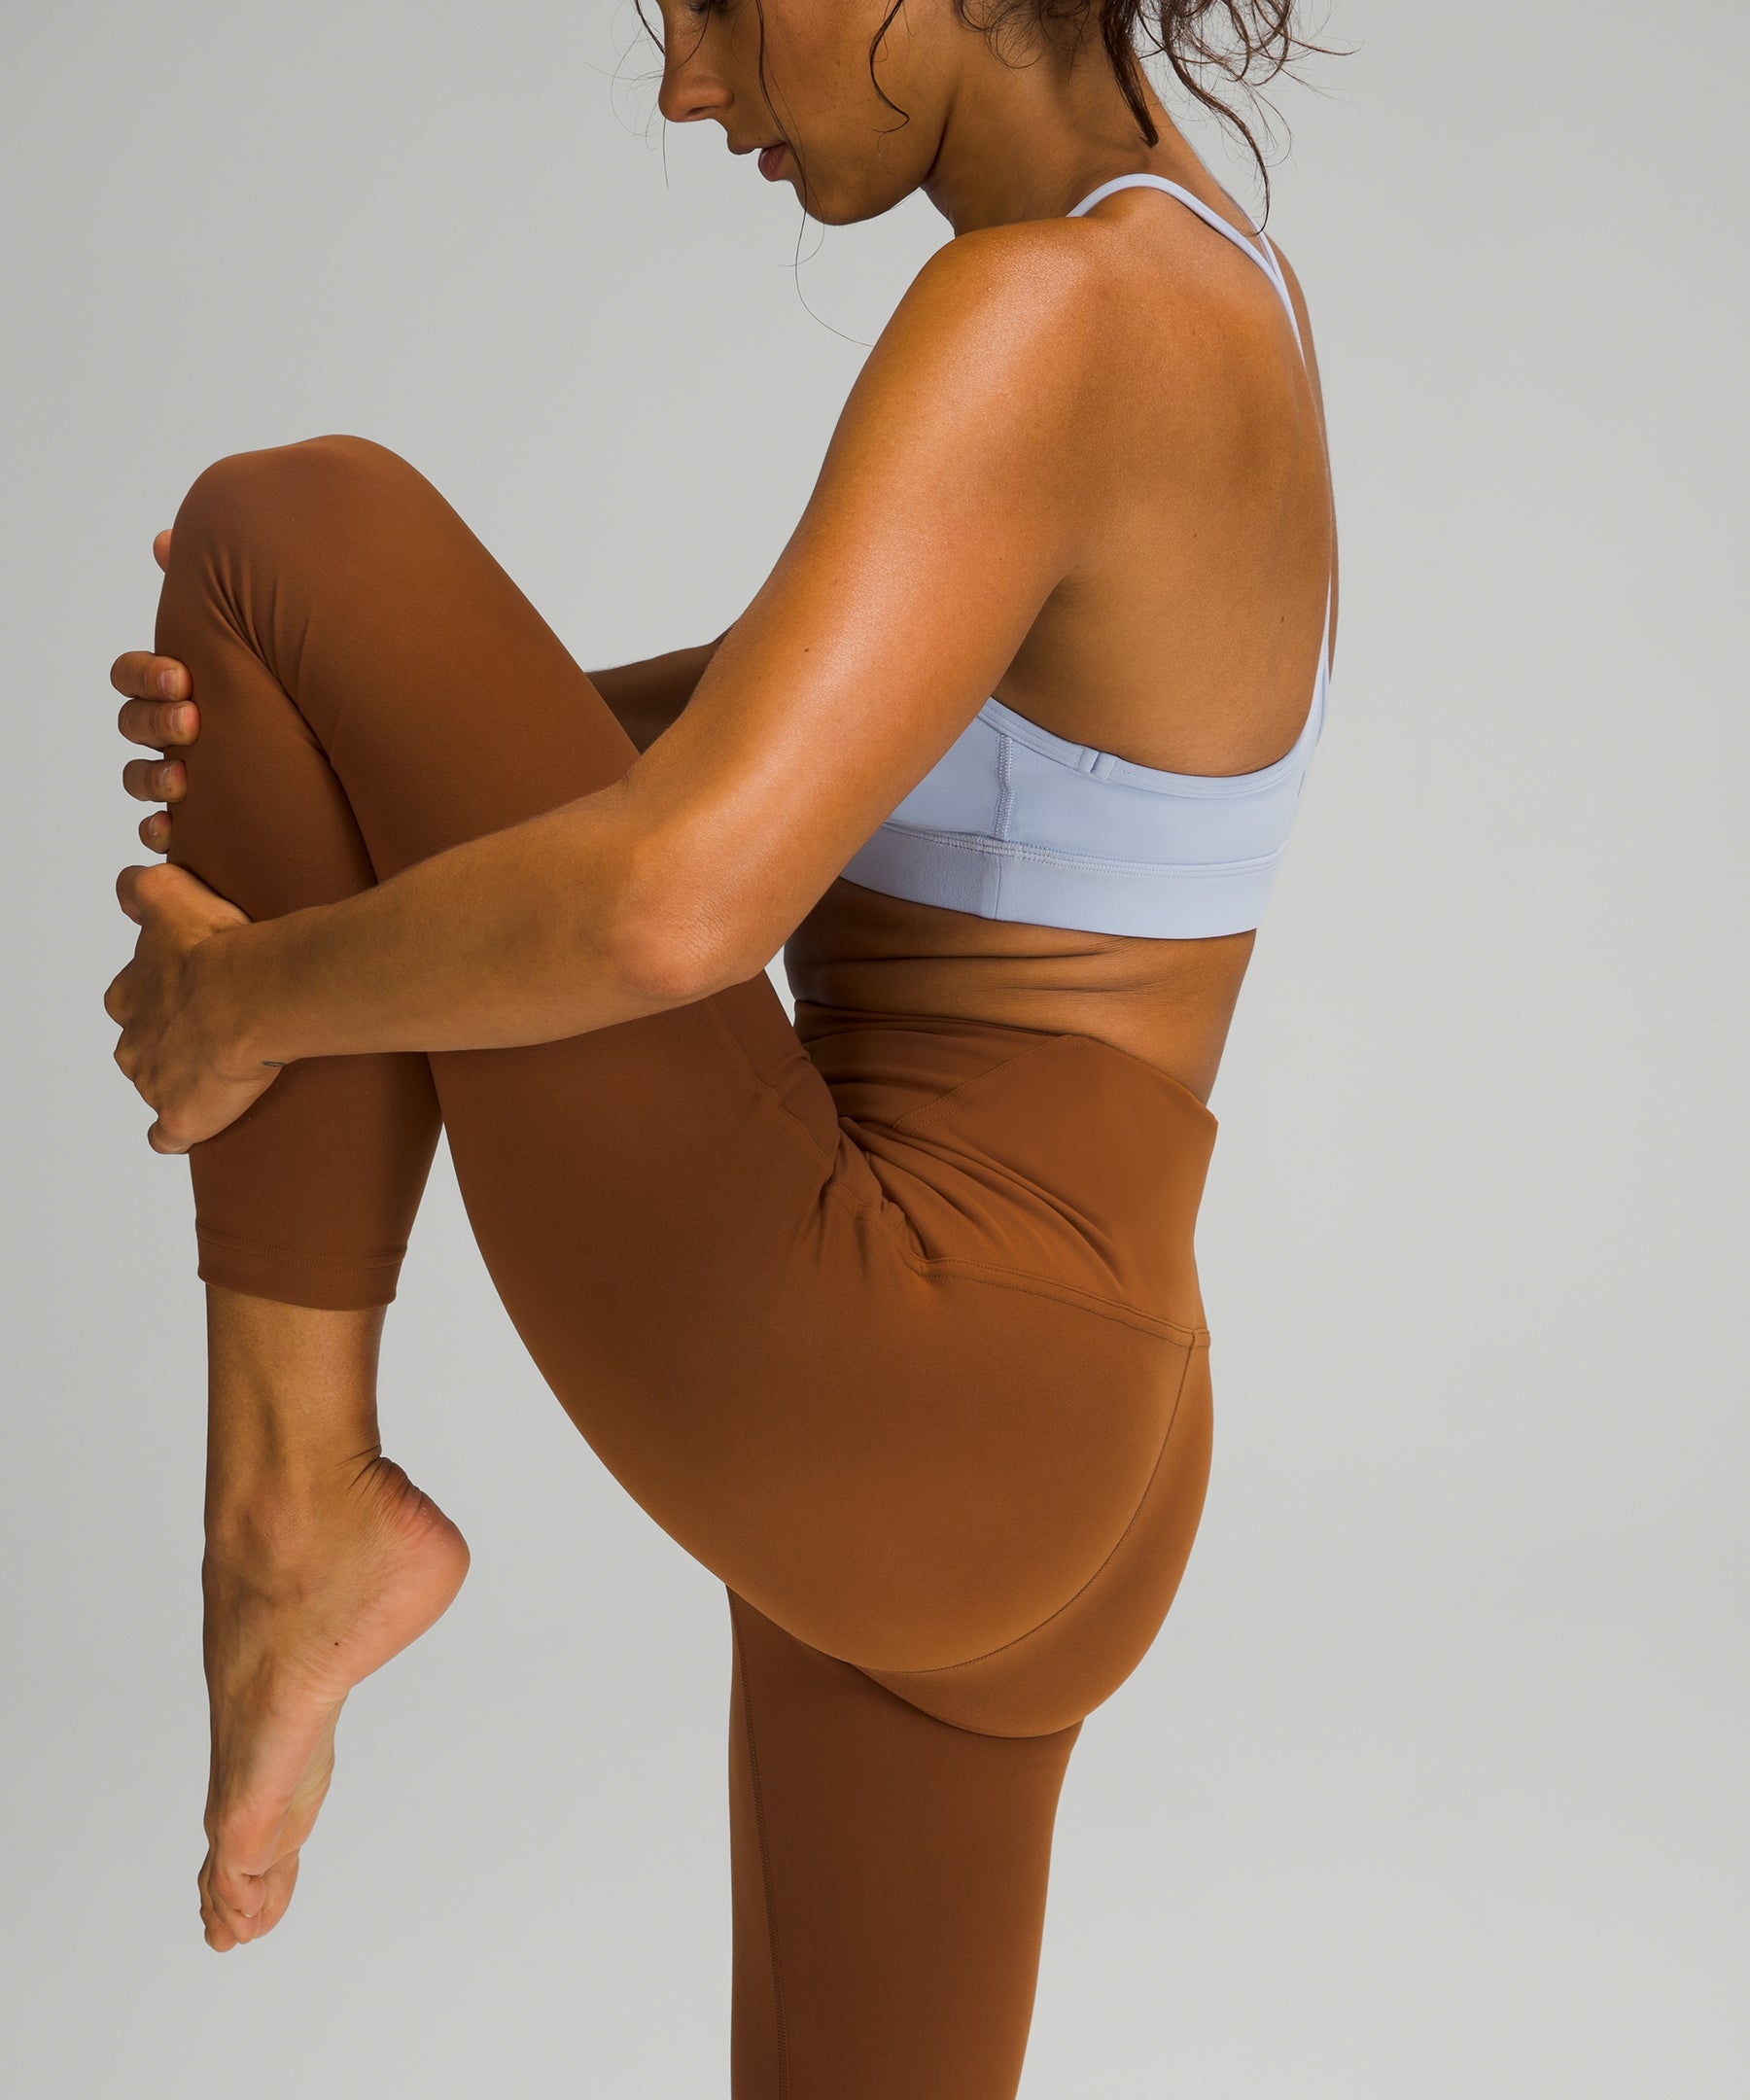 Lululemon Instill High-Rise Tight 25 Auric Gold Size 10 - $51 - From Anna